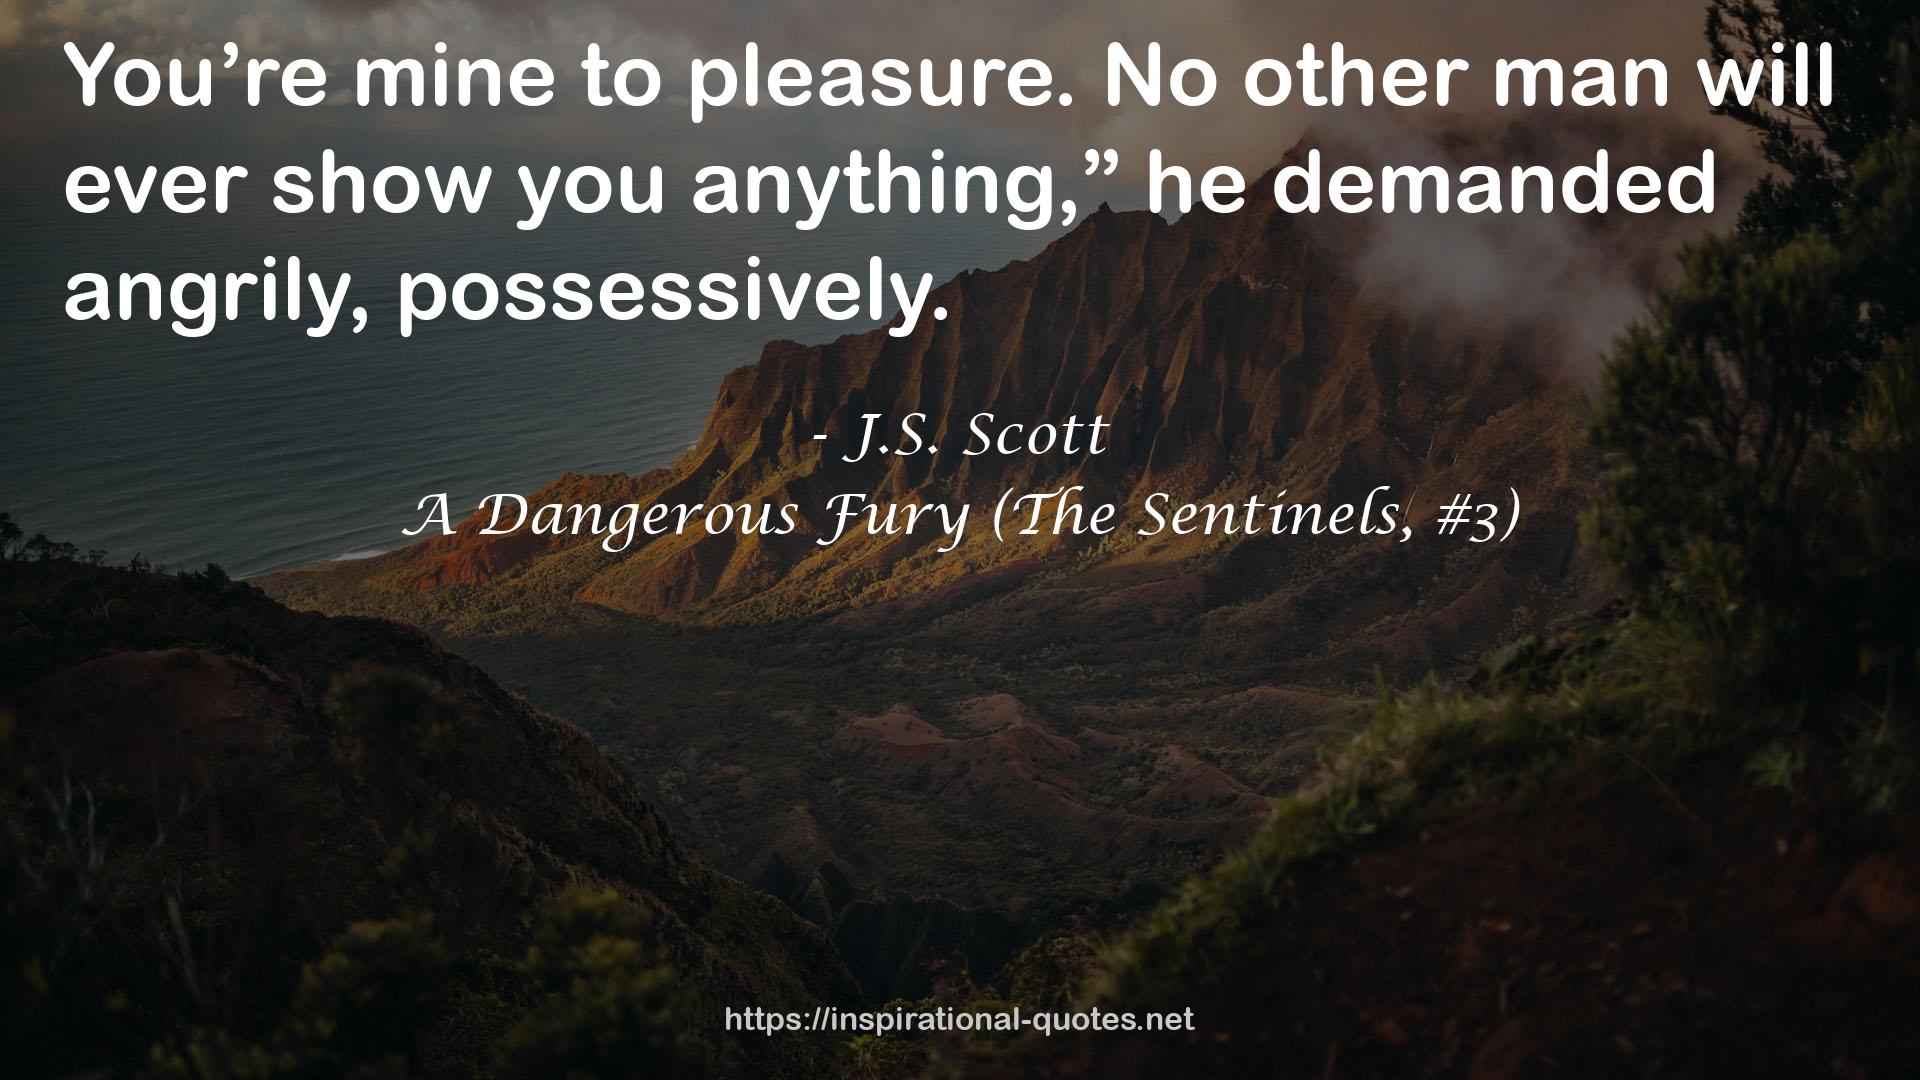 A Dangerous Fury (The Sentinels, #3) QUOTES